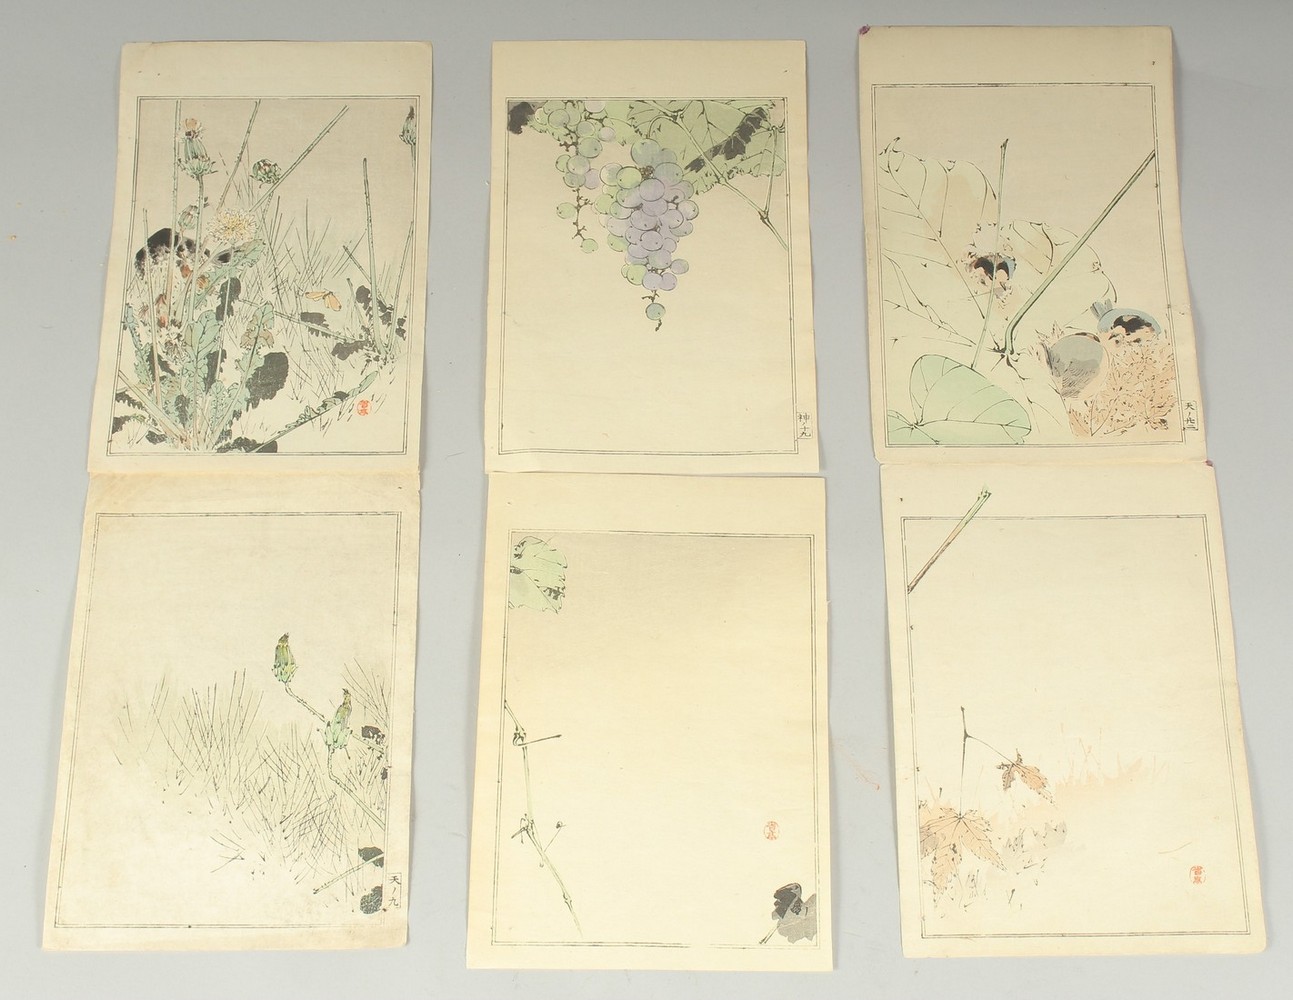 SEITEI WATANABE (1851-1918): FROM THE PICTURE ALBUM OF BIRDS AND FLOWERS, 1903; three original